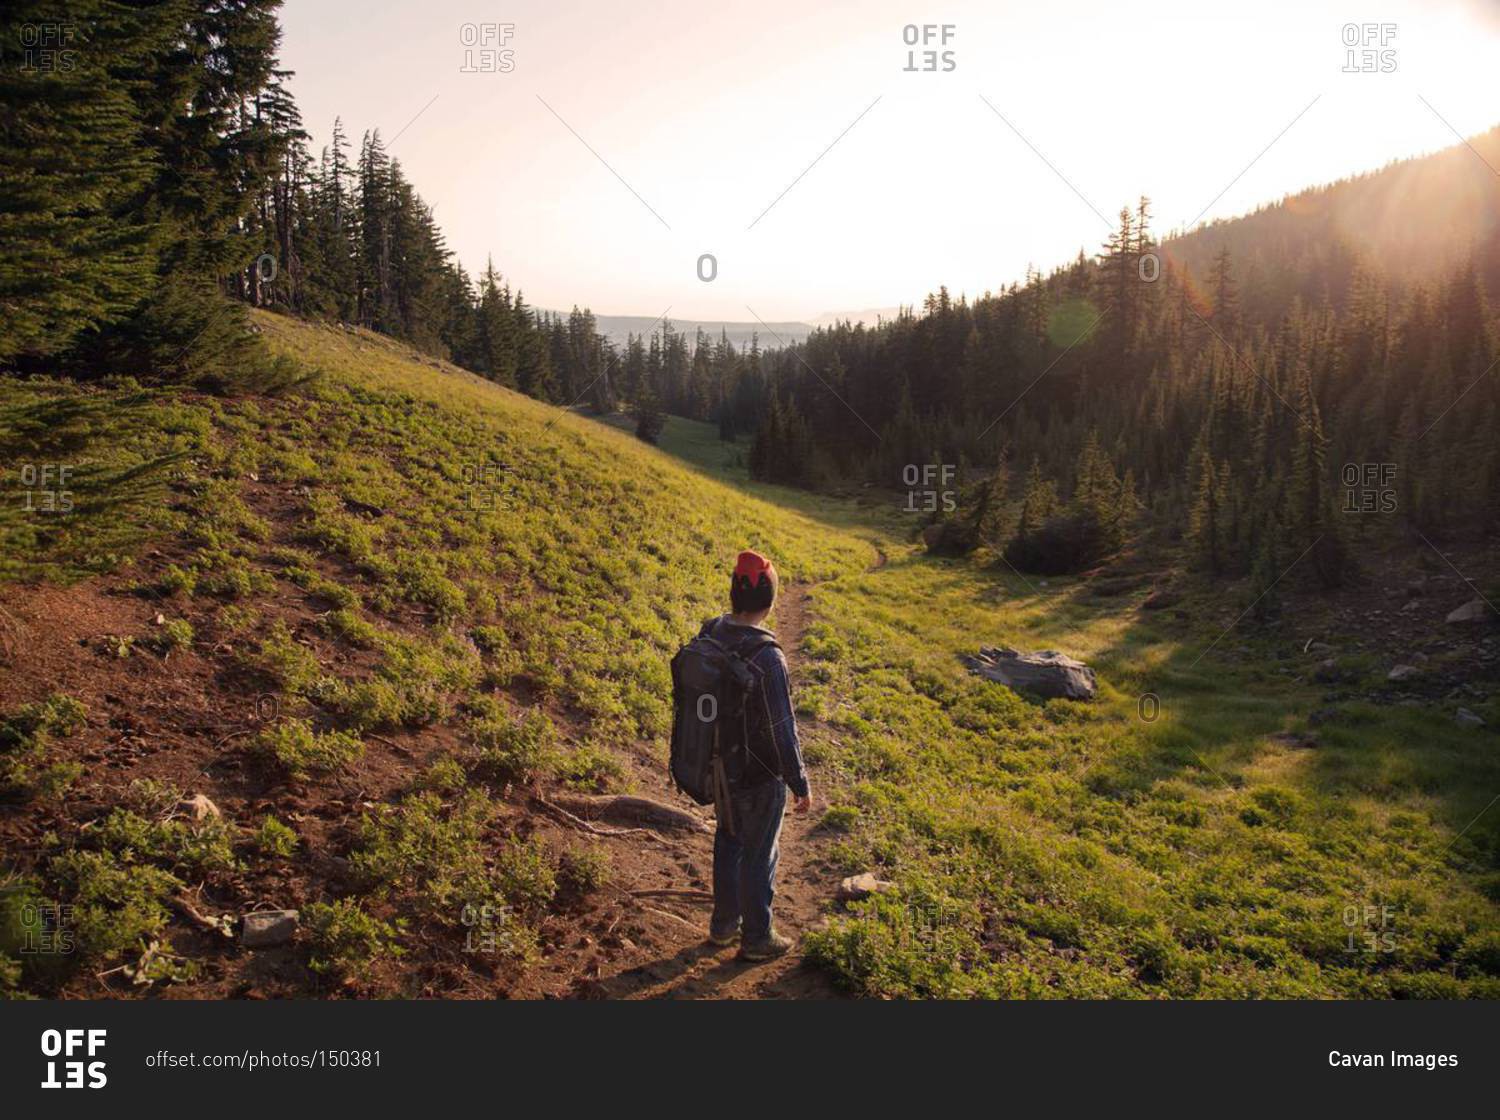 Hiker looking at setting sun over mountain valley, central Oregon